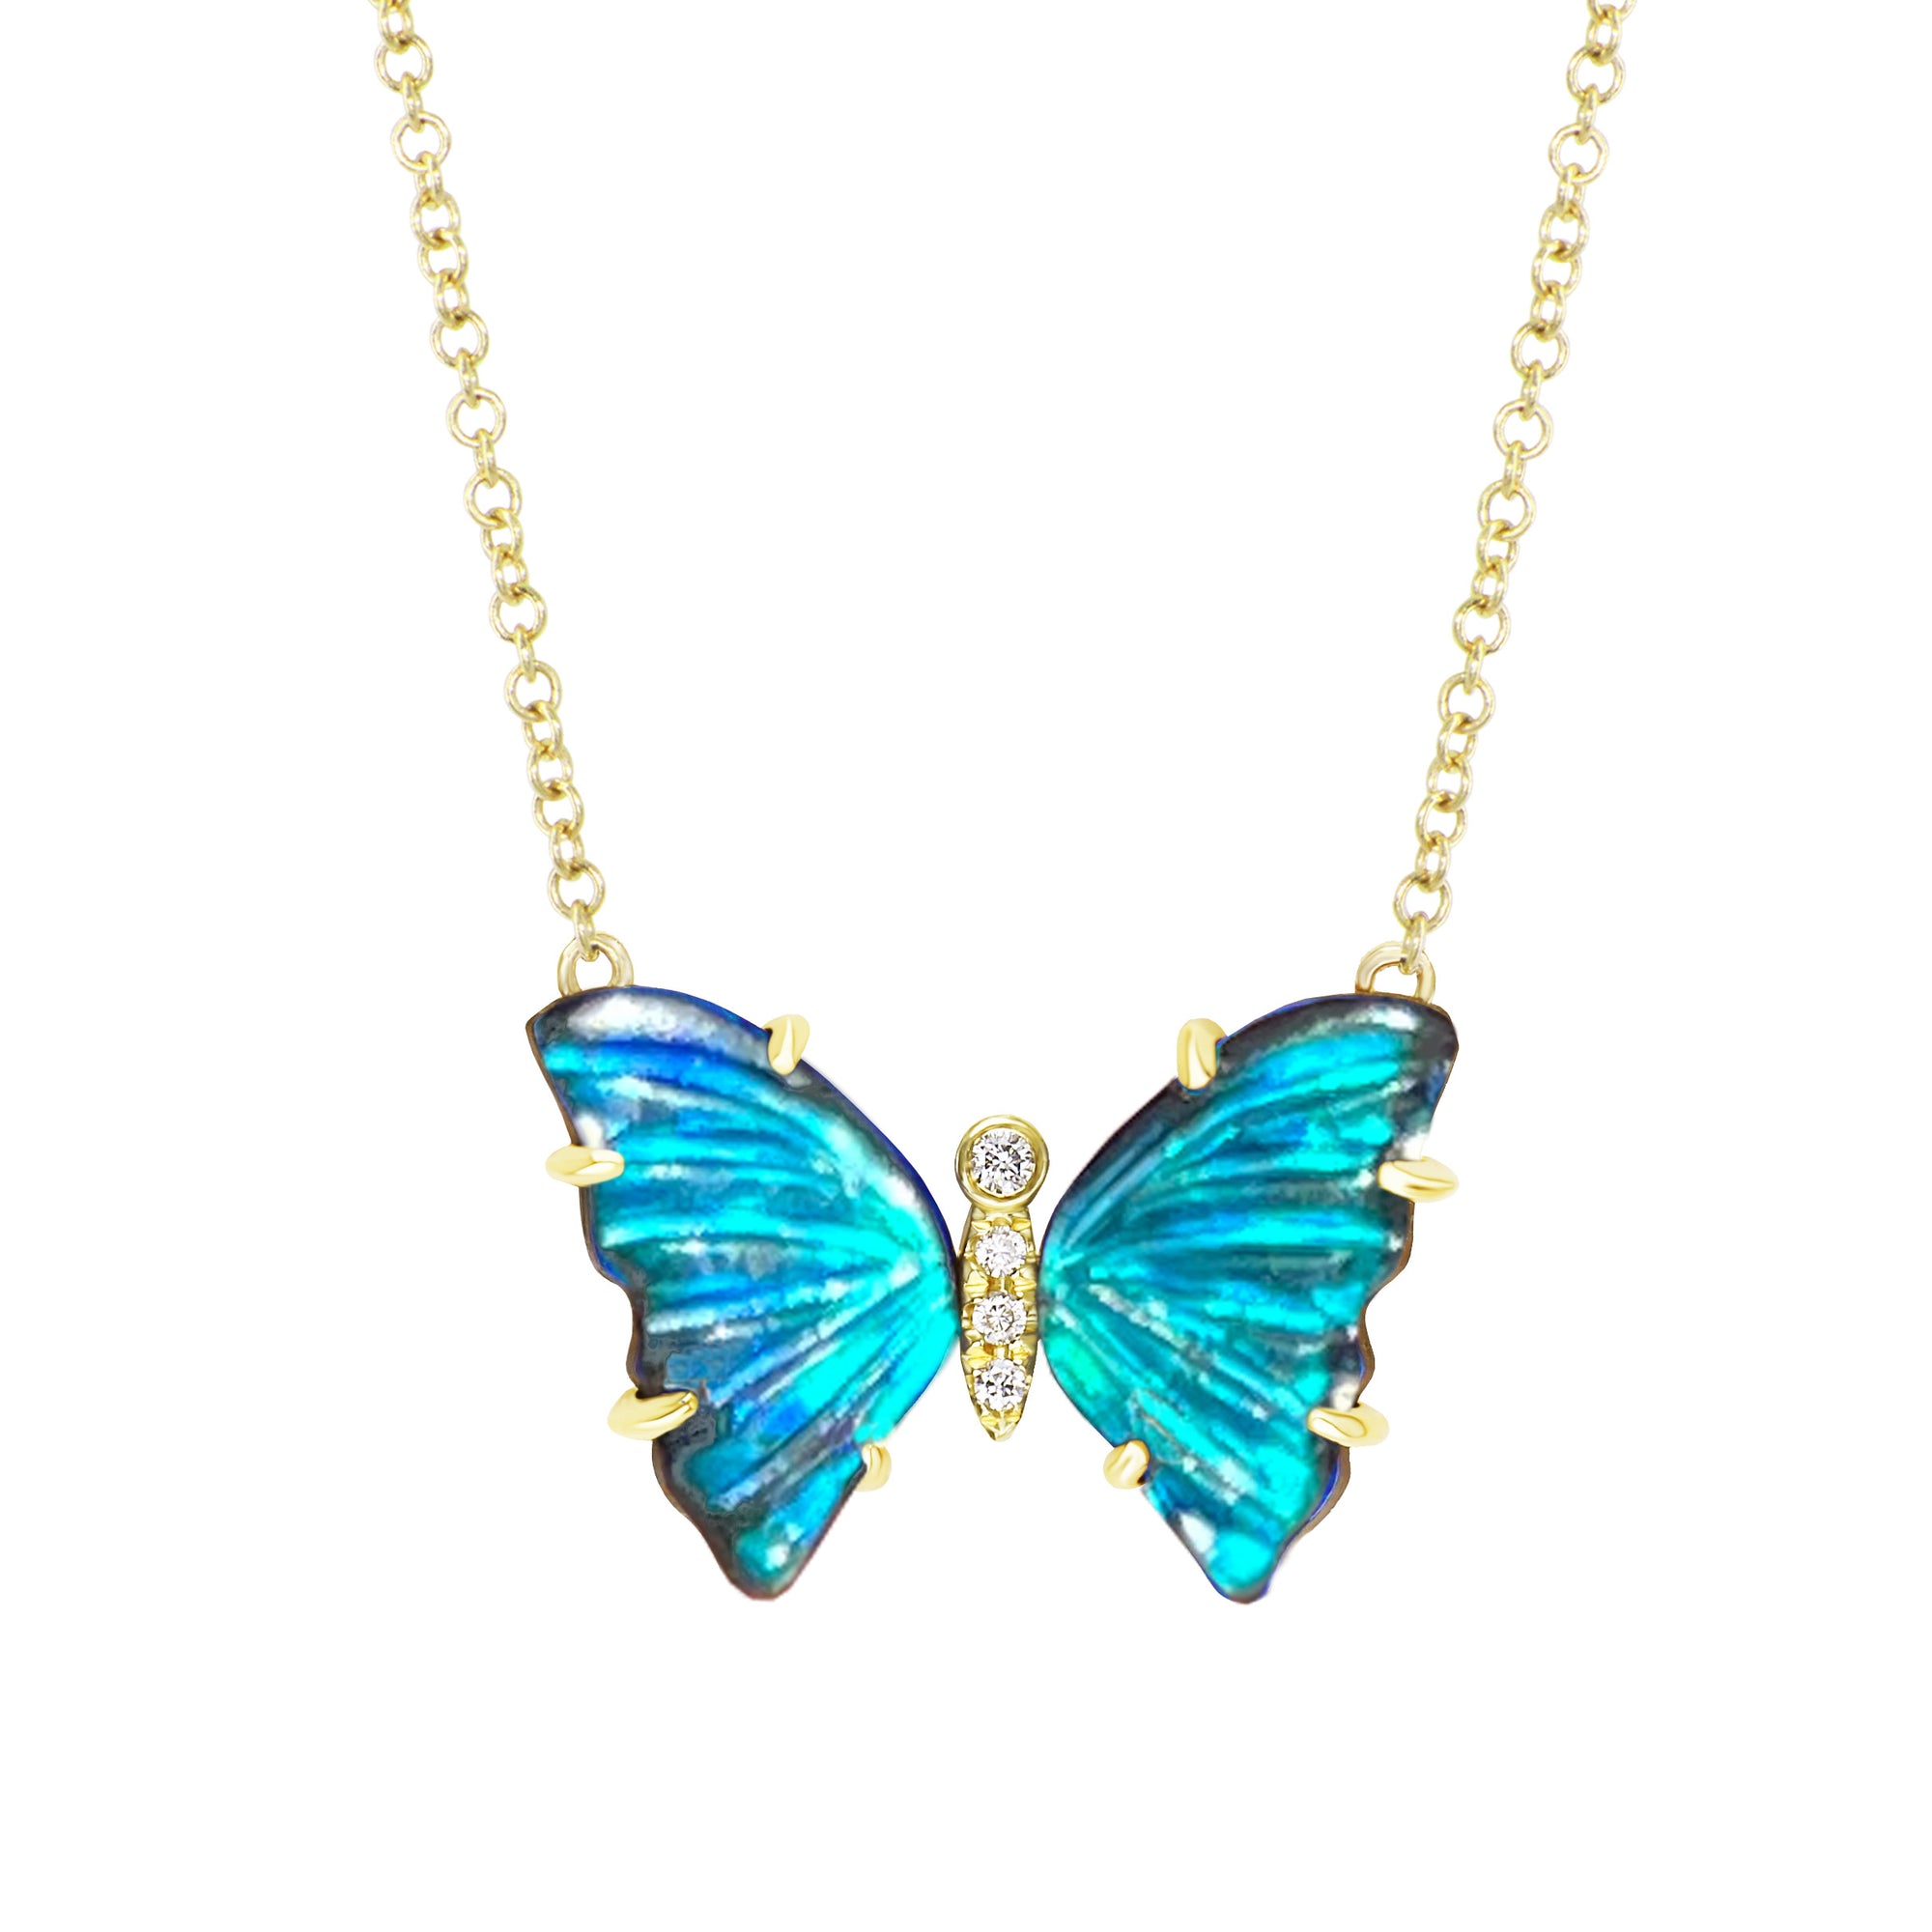 Blue Morpho Butterfly Necklace with Diamonds and Prongs - London Blue Topaz